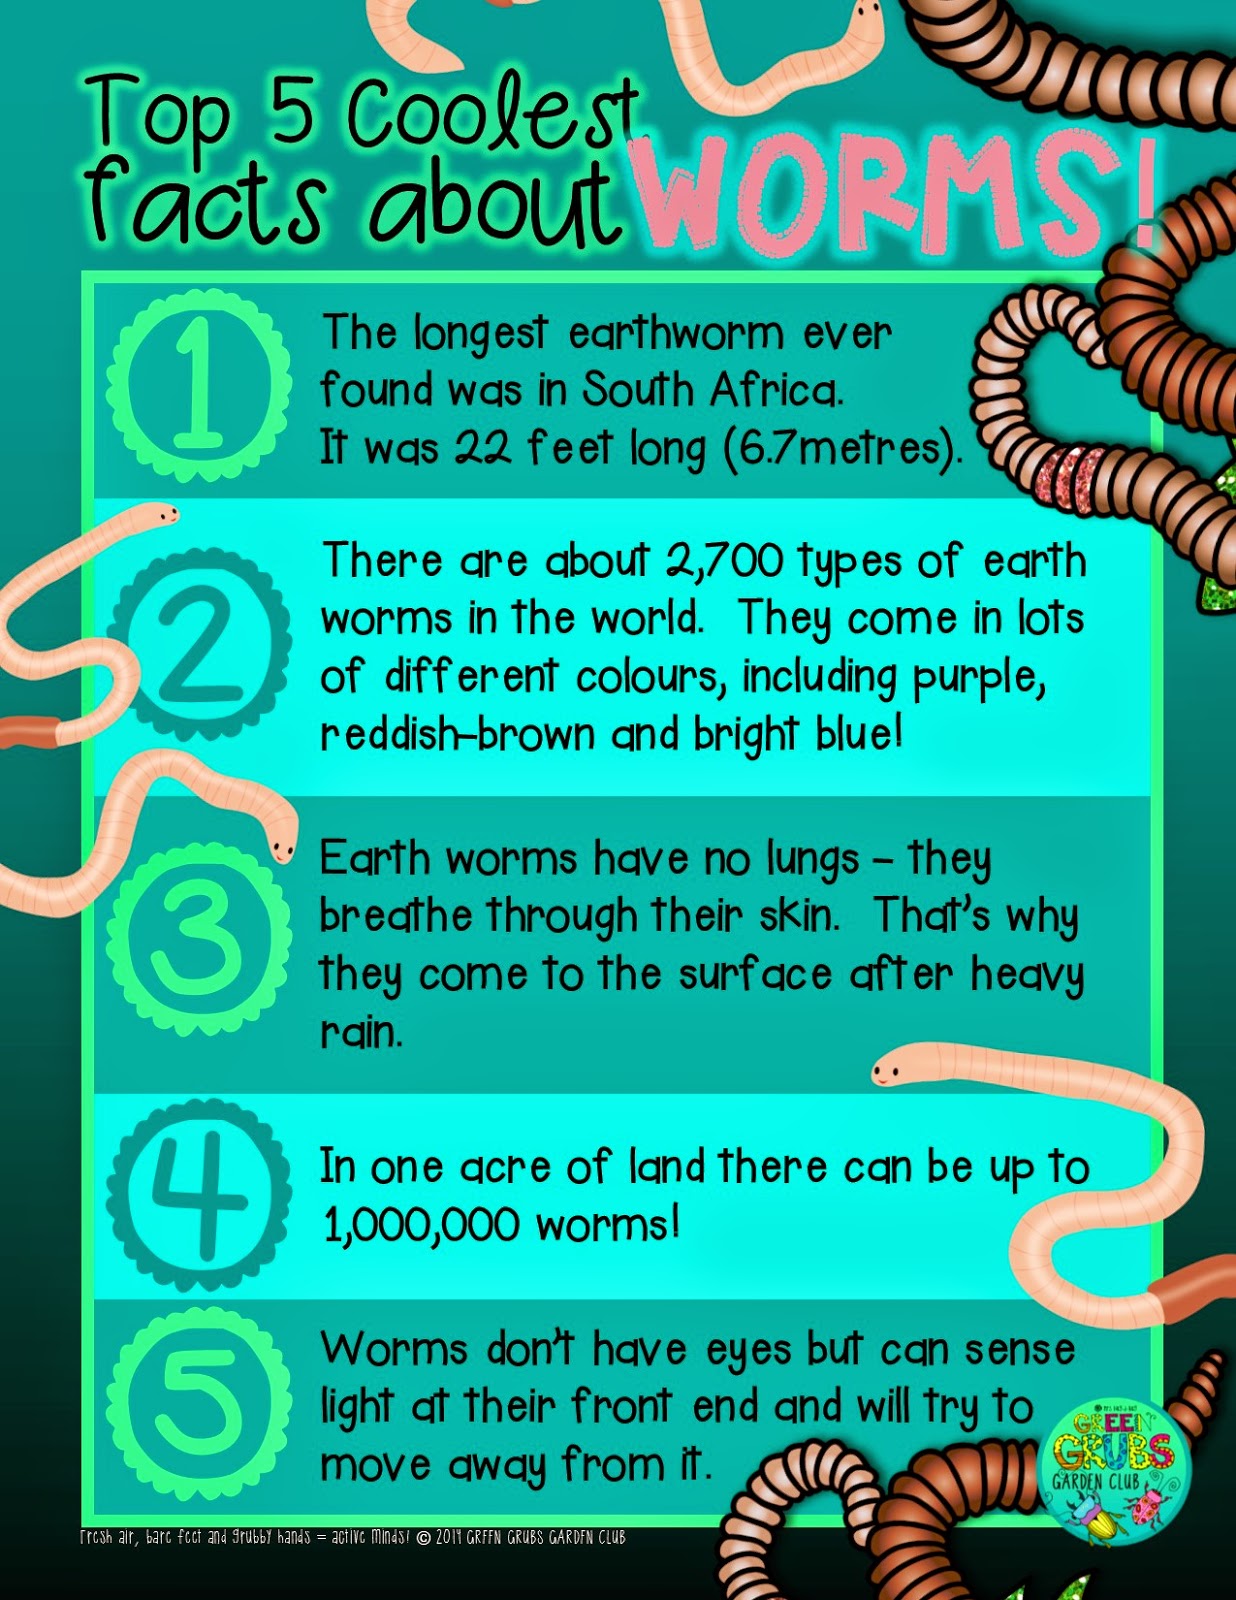 Top 5 coolest facts about… WORMS!